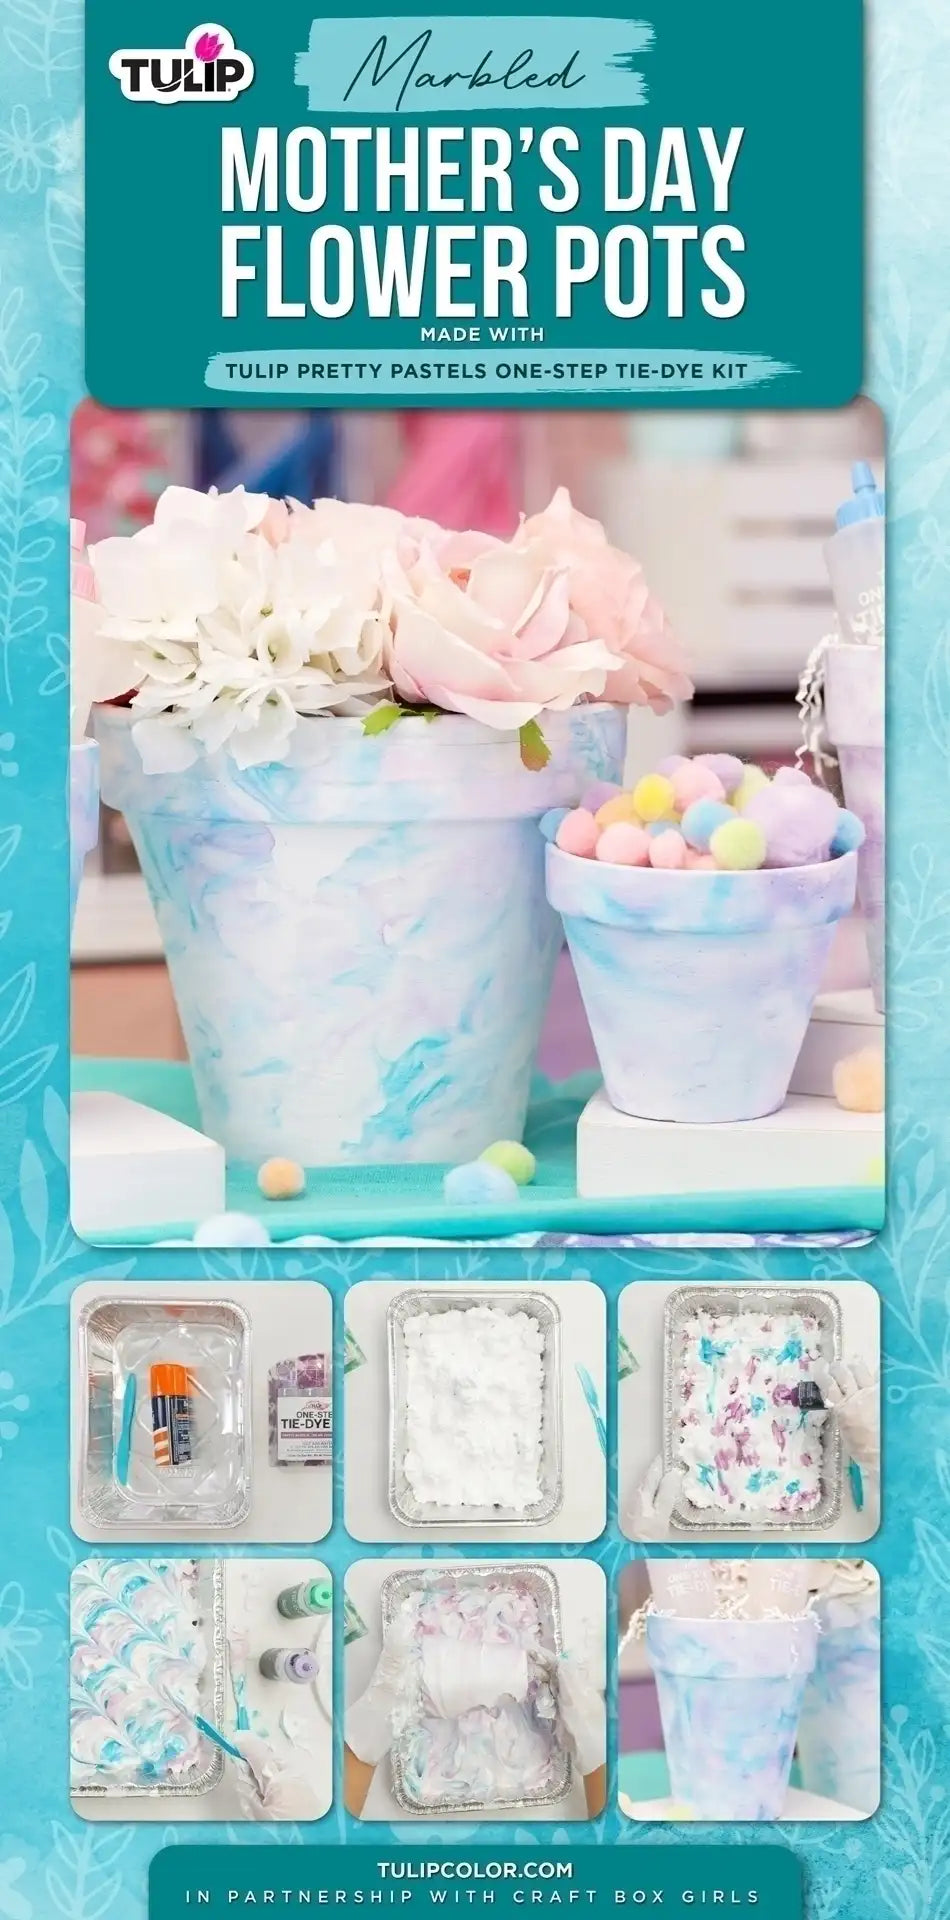 Mother’s Day Crafts: Marbled Tie-Dye Flower Pots